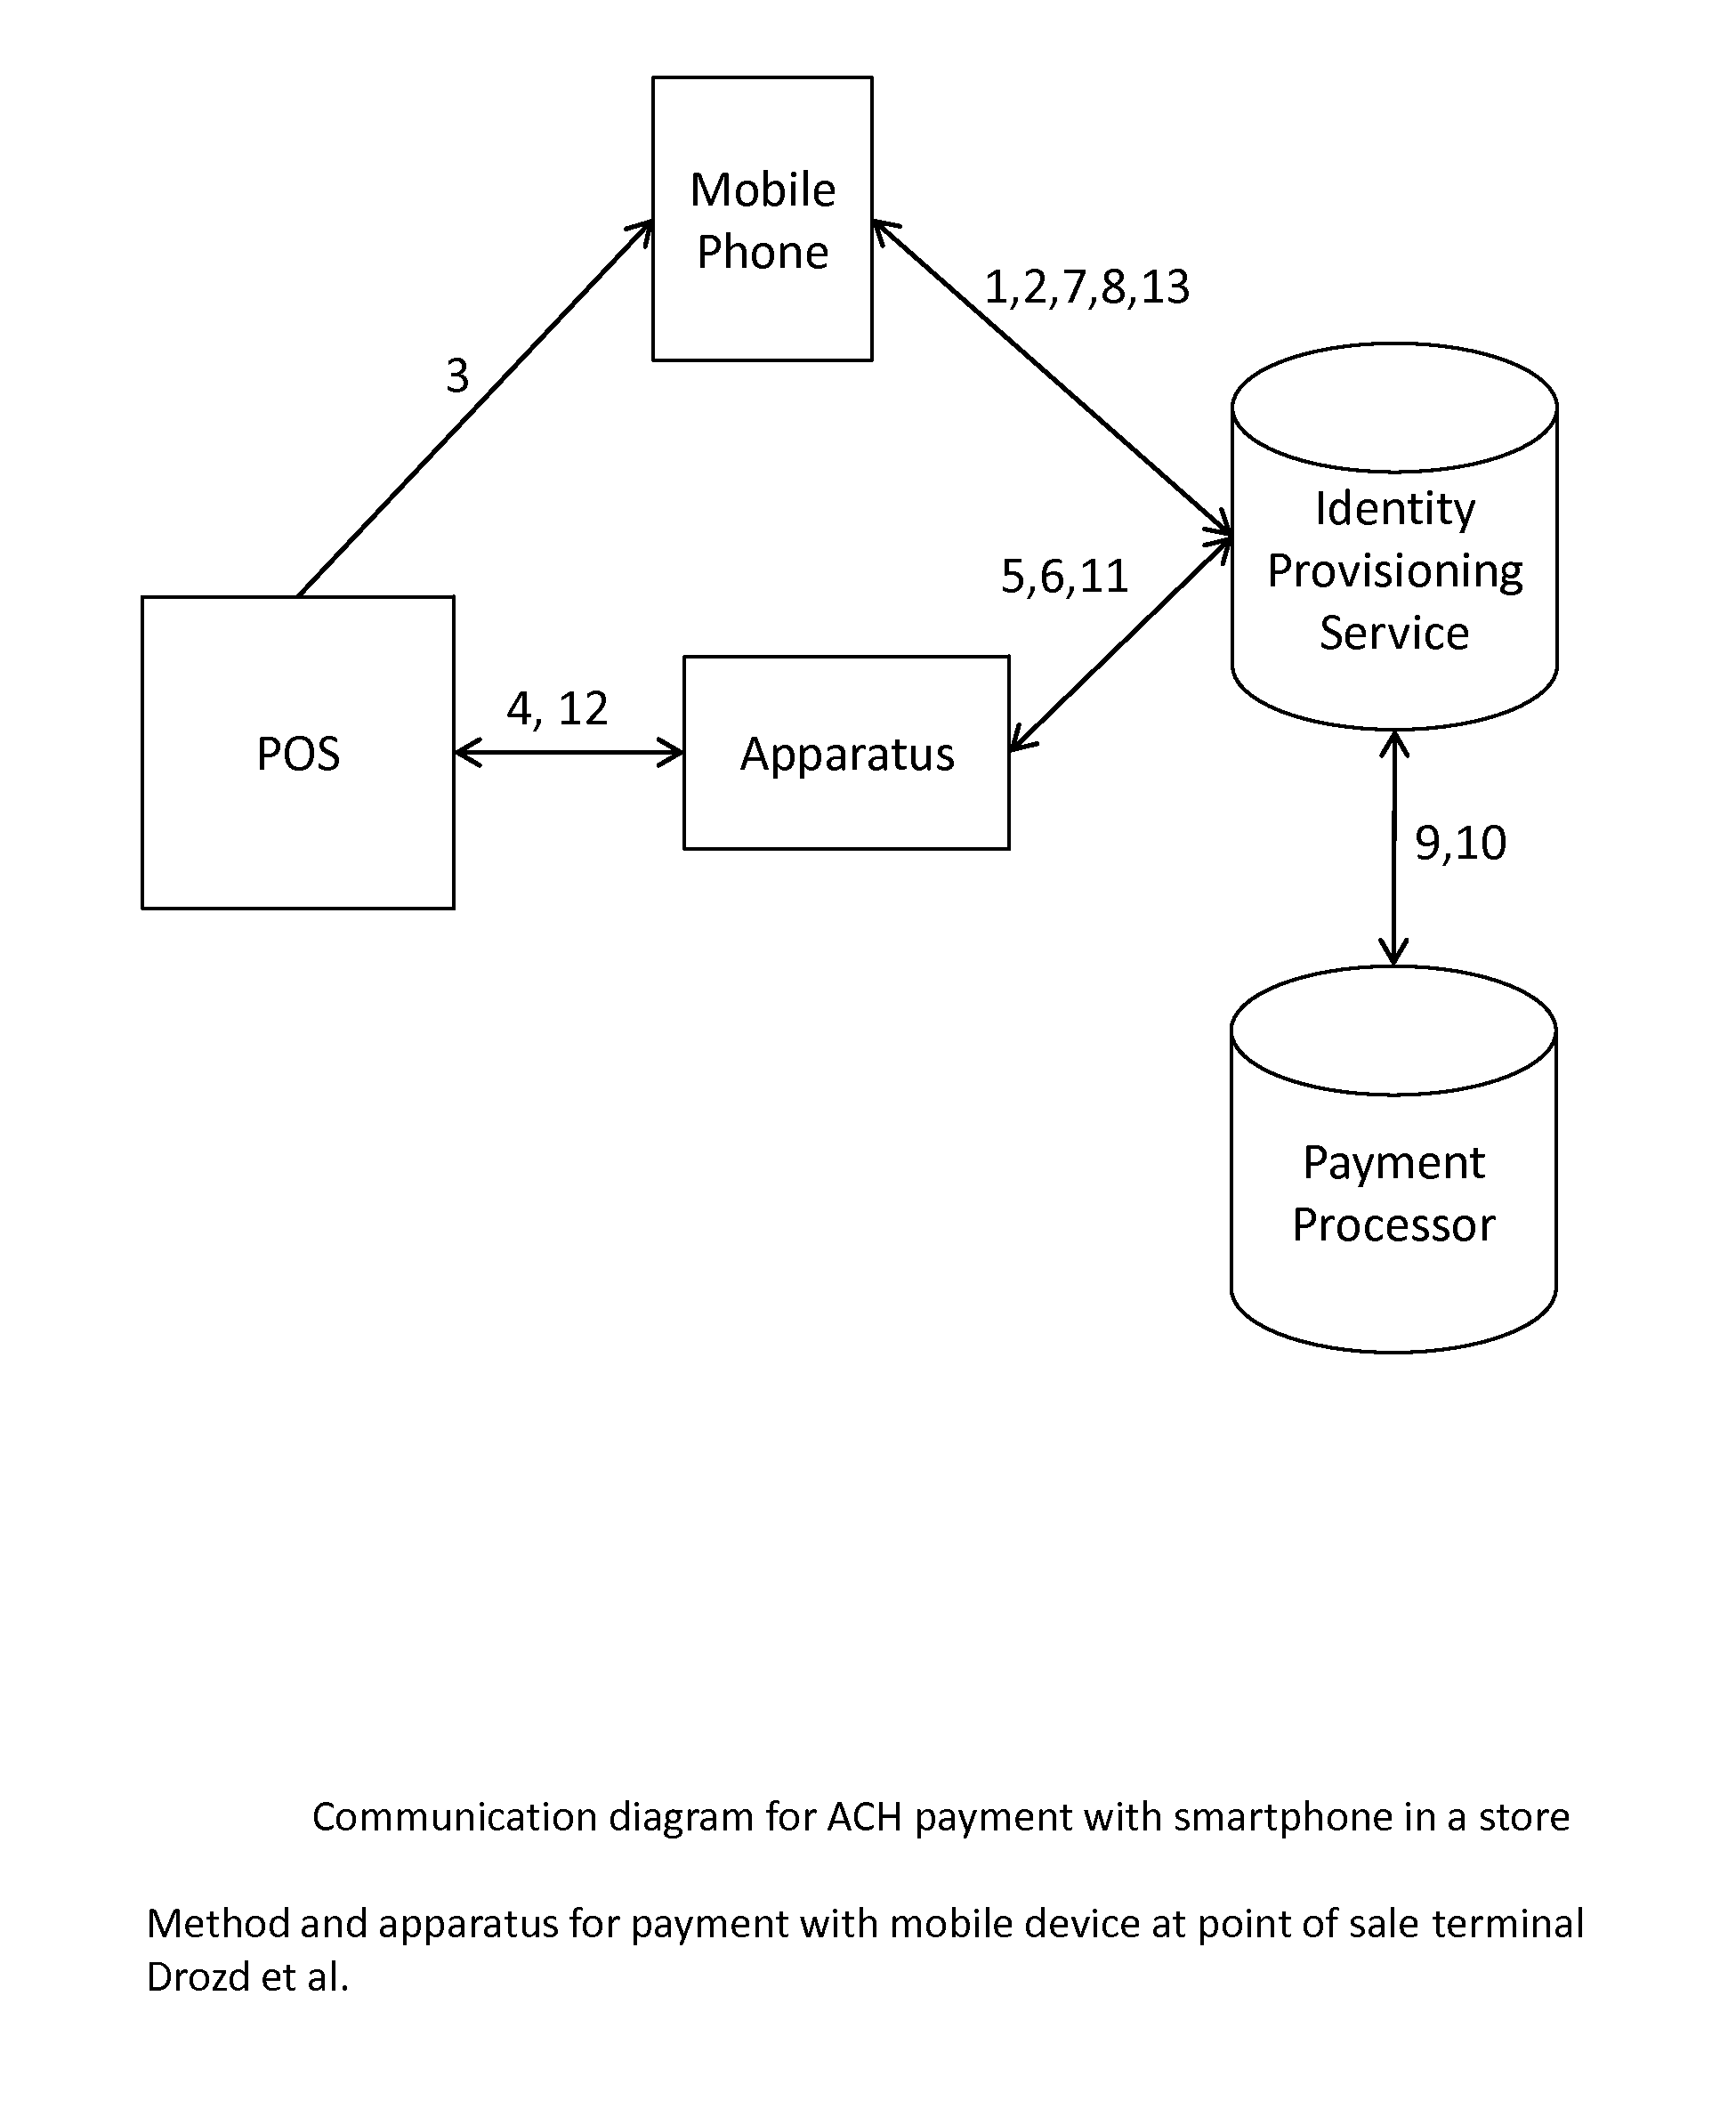 Method and apparatus for payment with mobile device at point of sale terminal